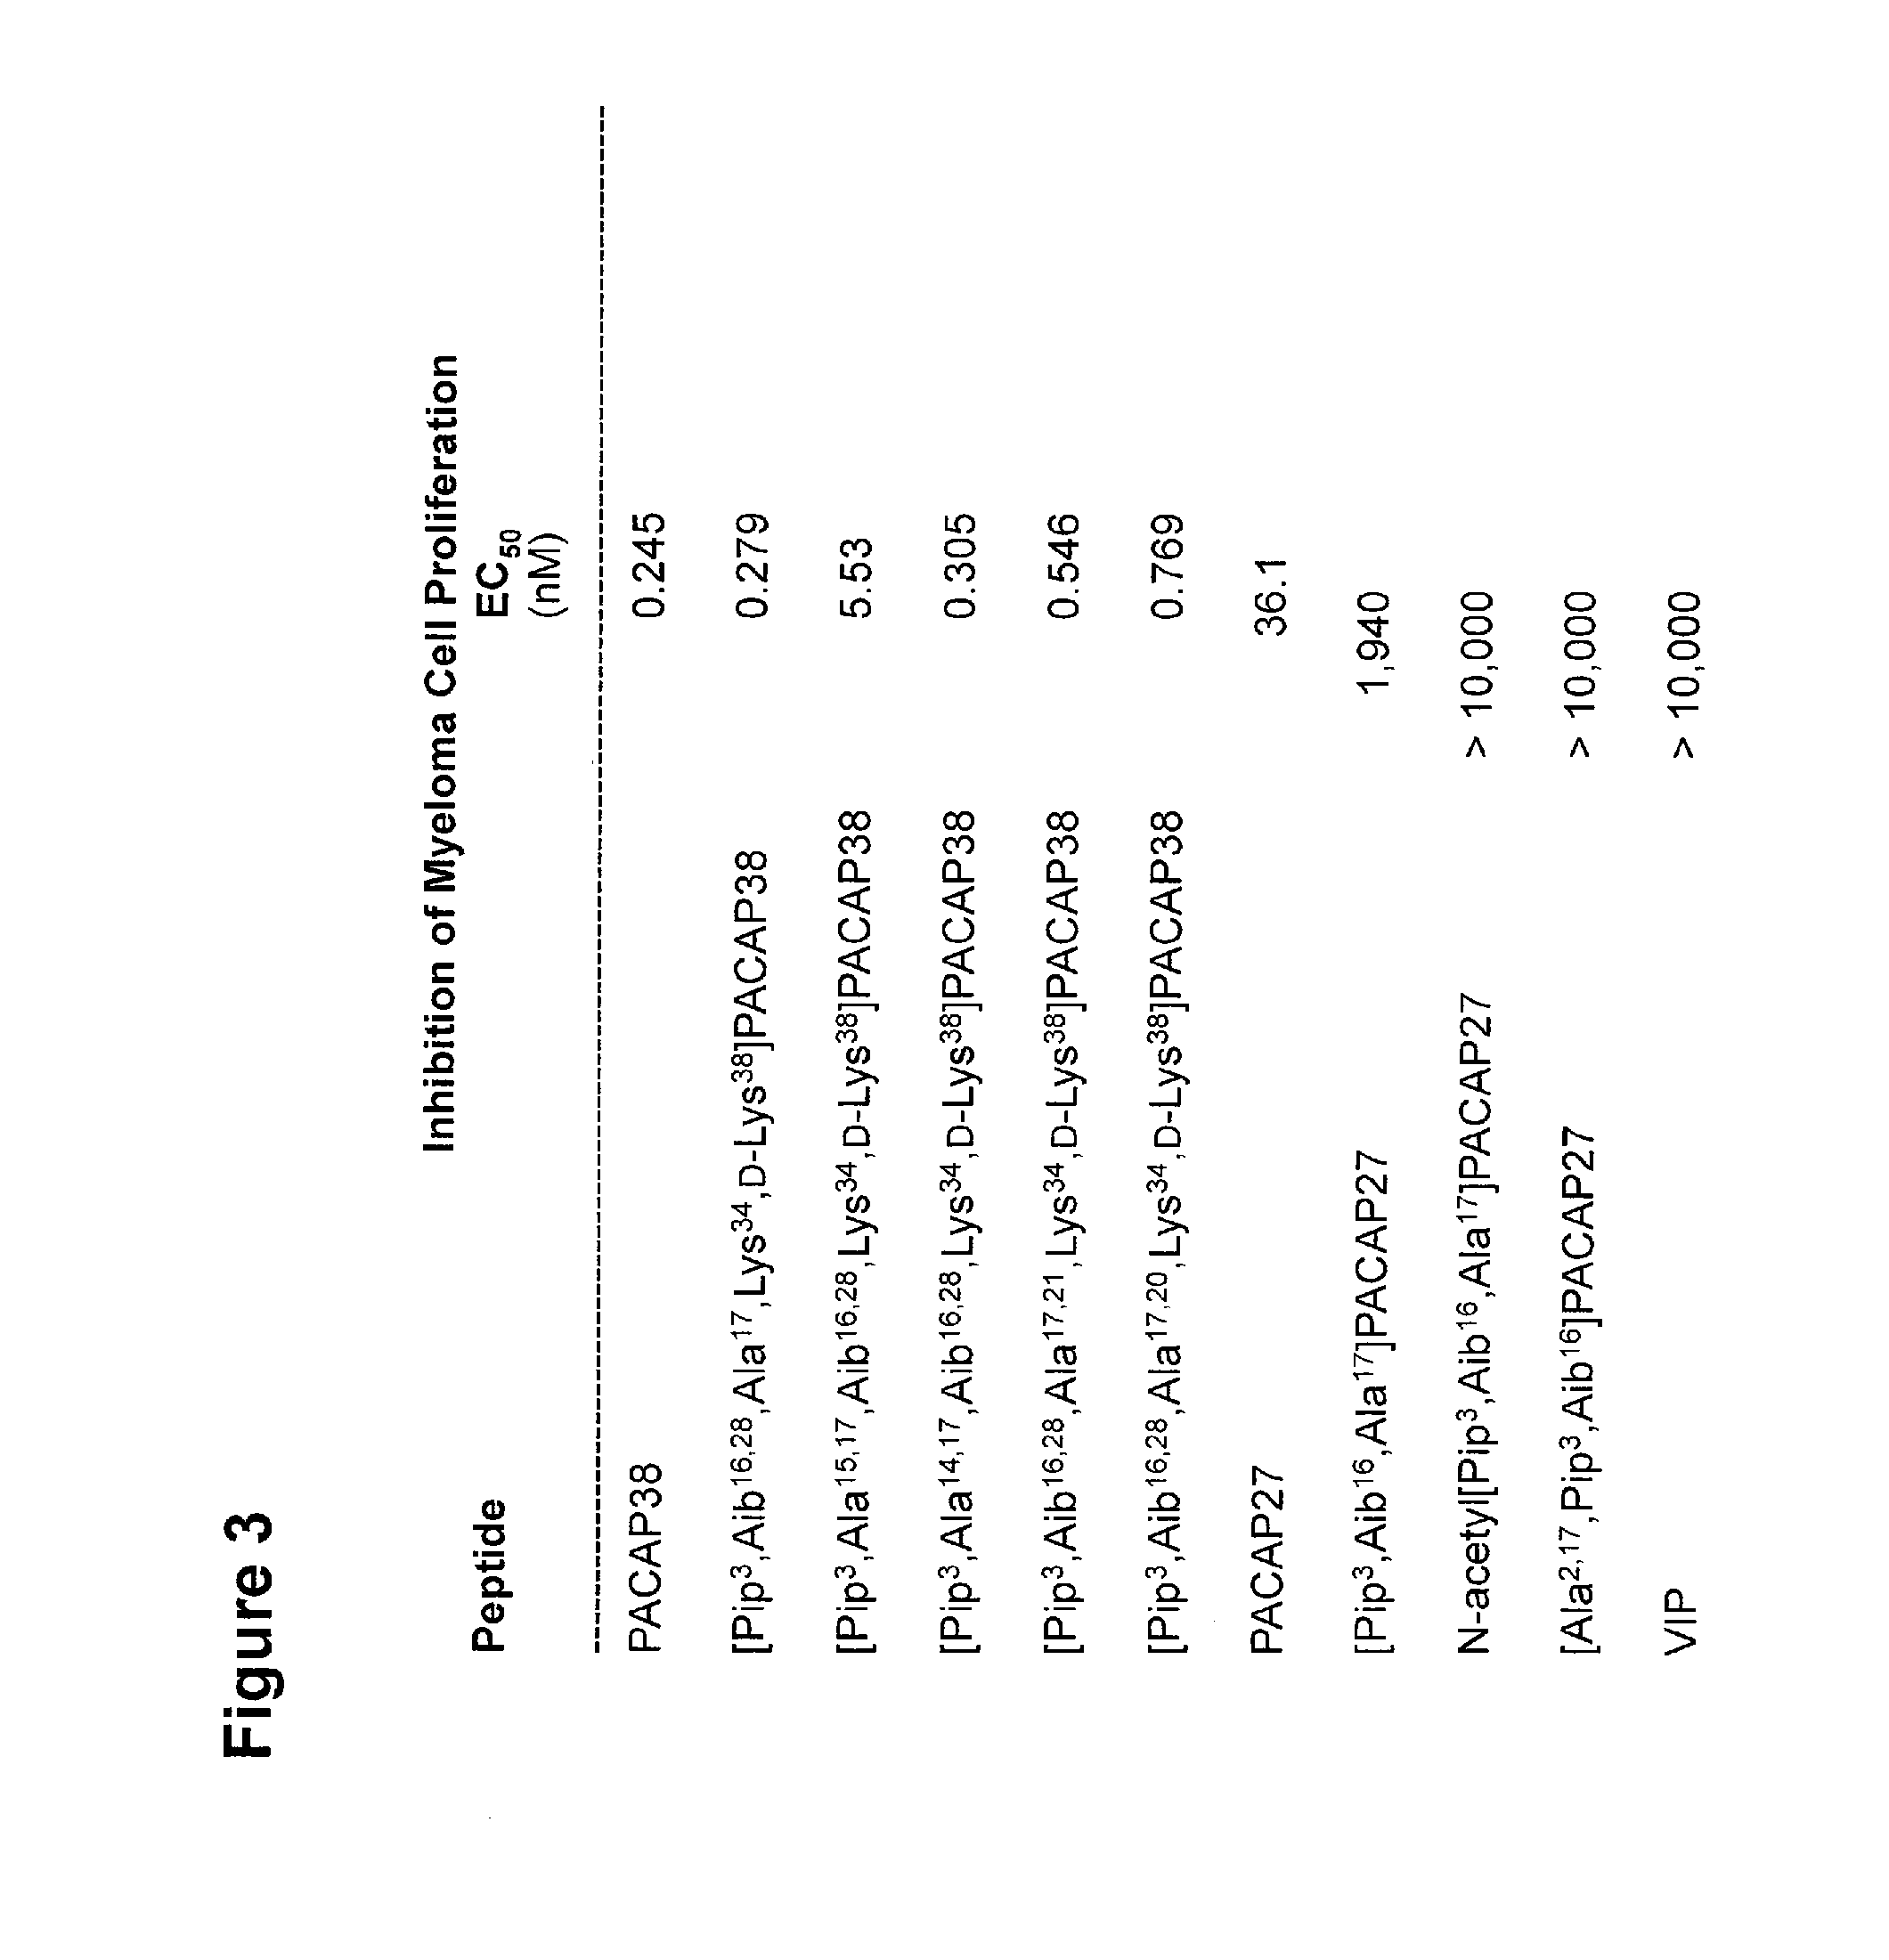 Analogs of pituitary adenylate cyclase-activating polypeptide (PACAP) and methods for their use